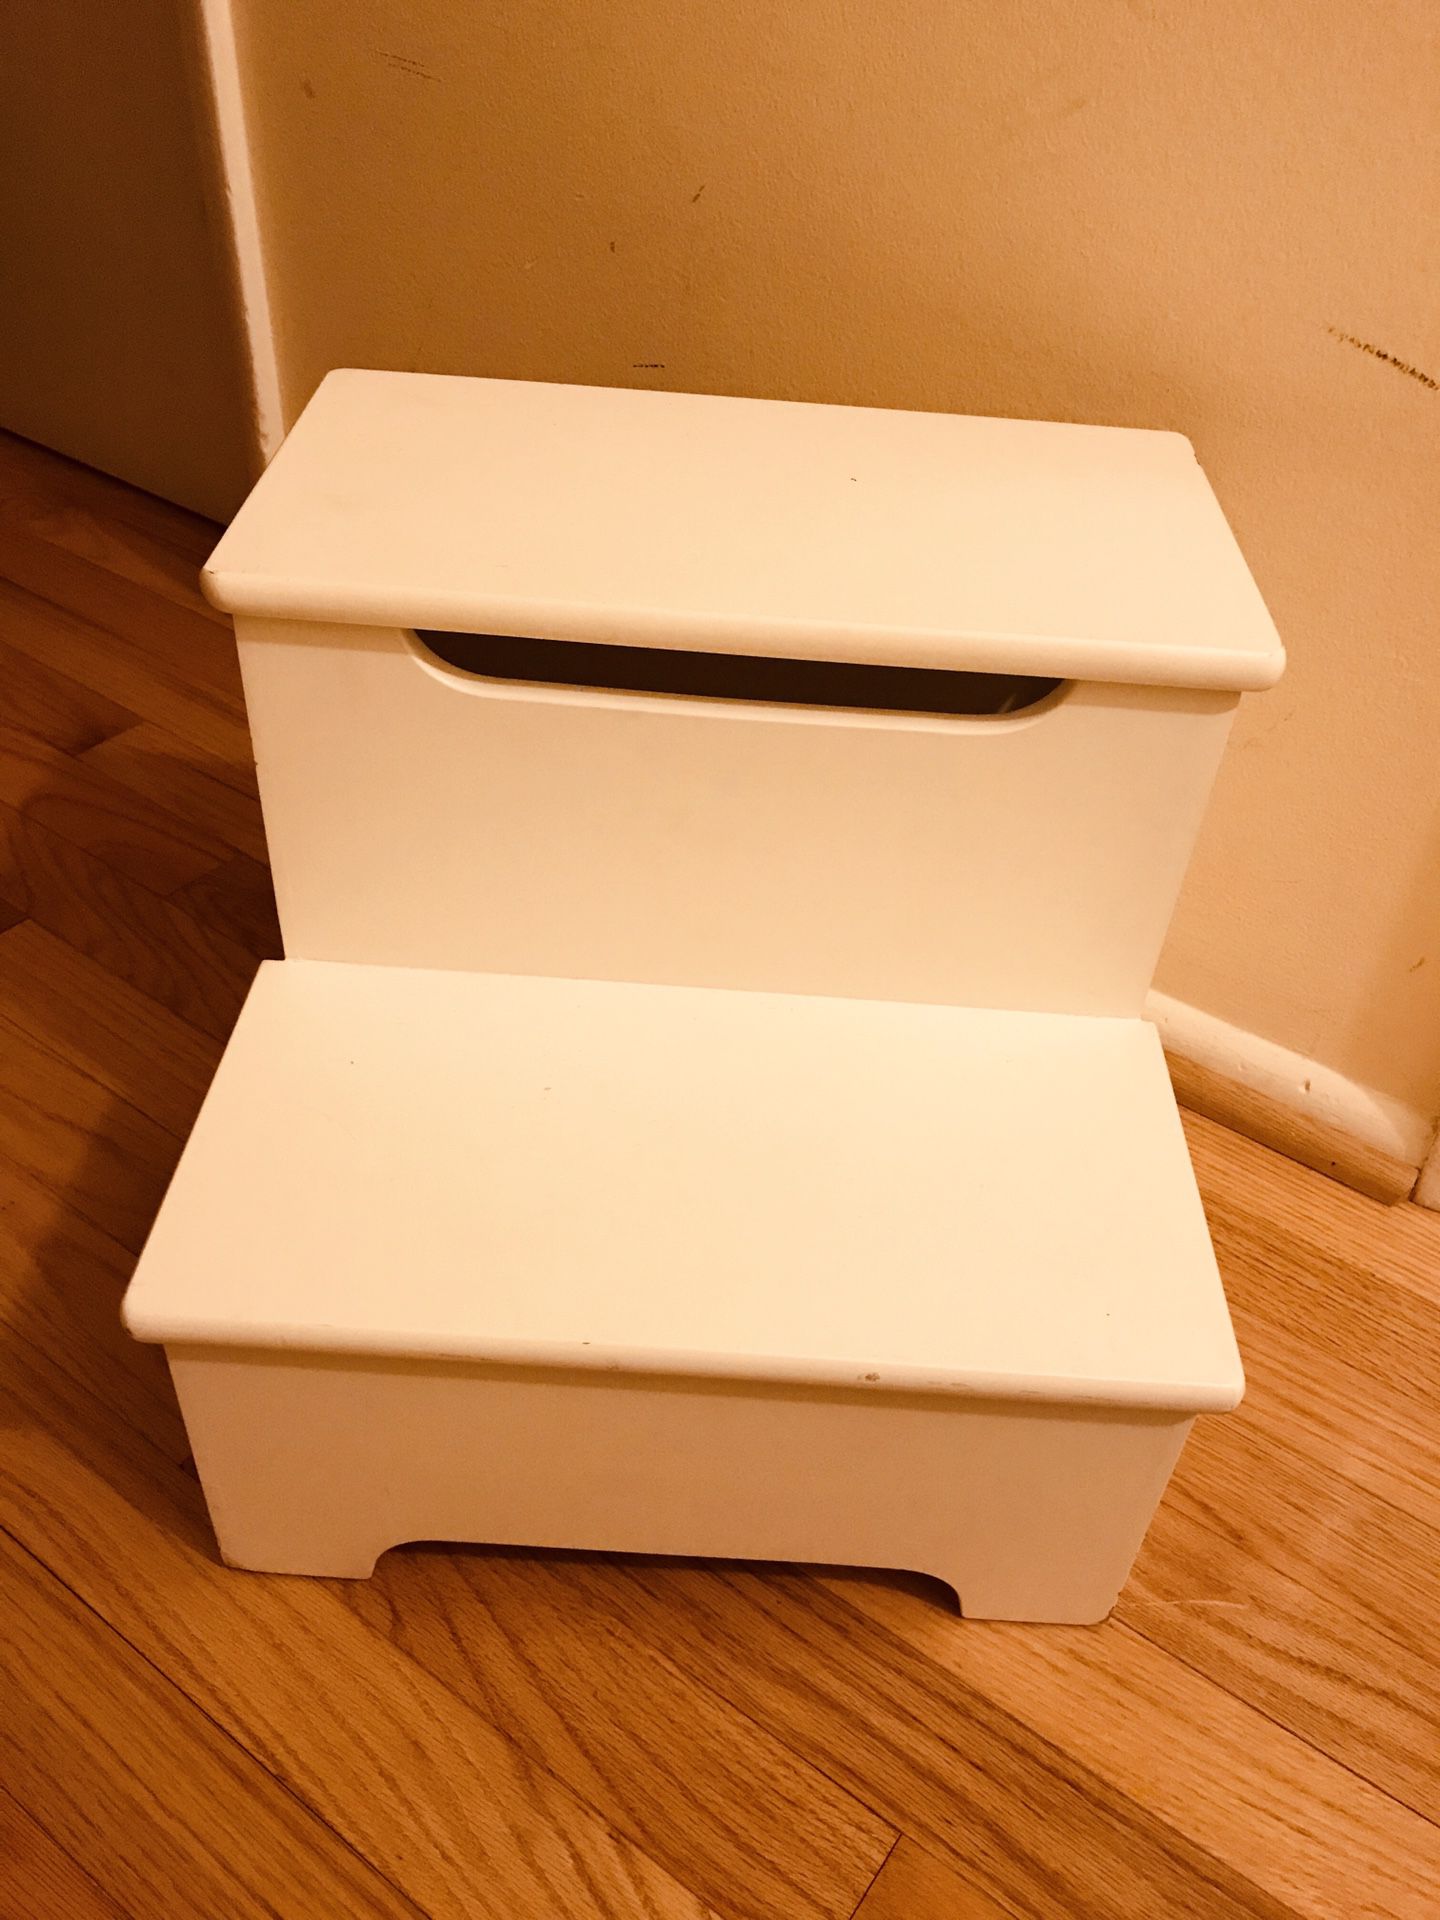 Kids sturdy wooden two-step step stool!